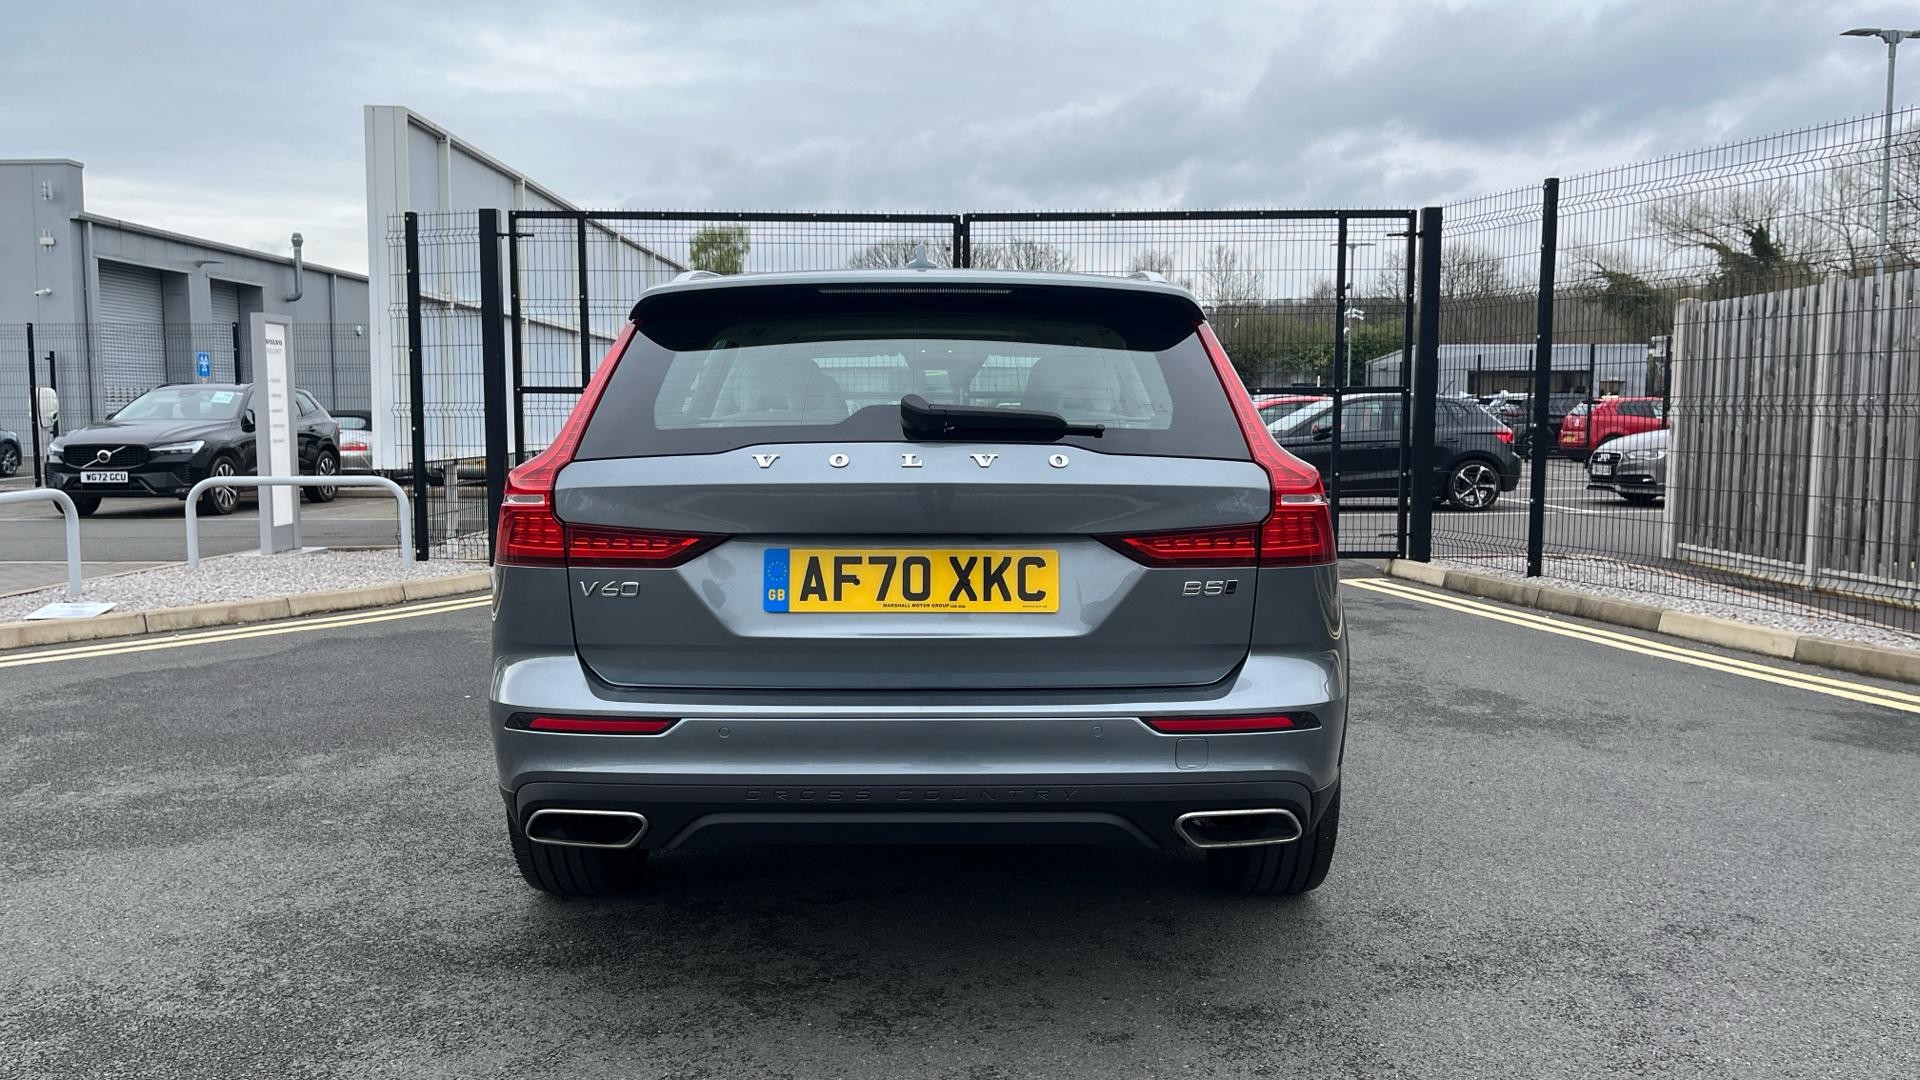 Volvo V60 2.0 B5P Cross Country 5dr AWD Auto (AF70XKC) image 12